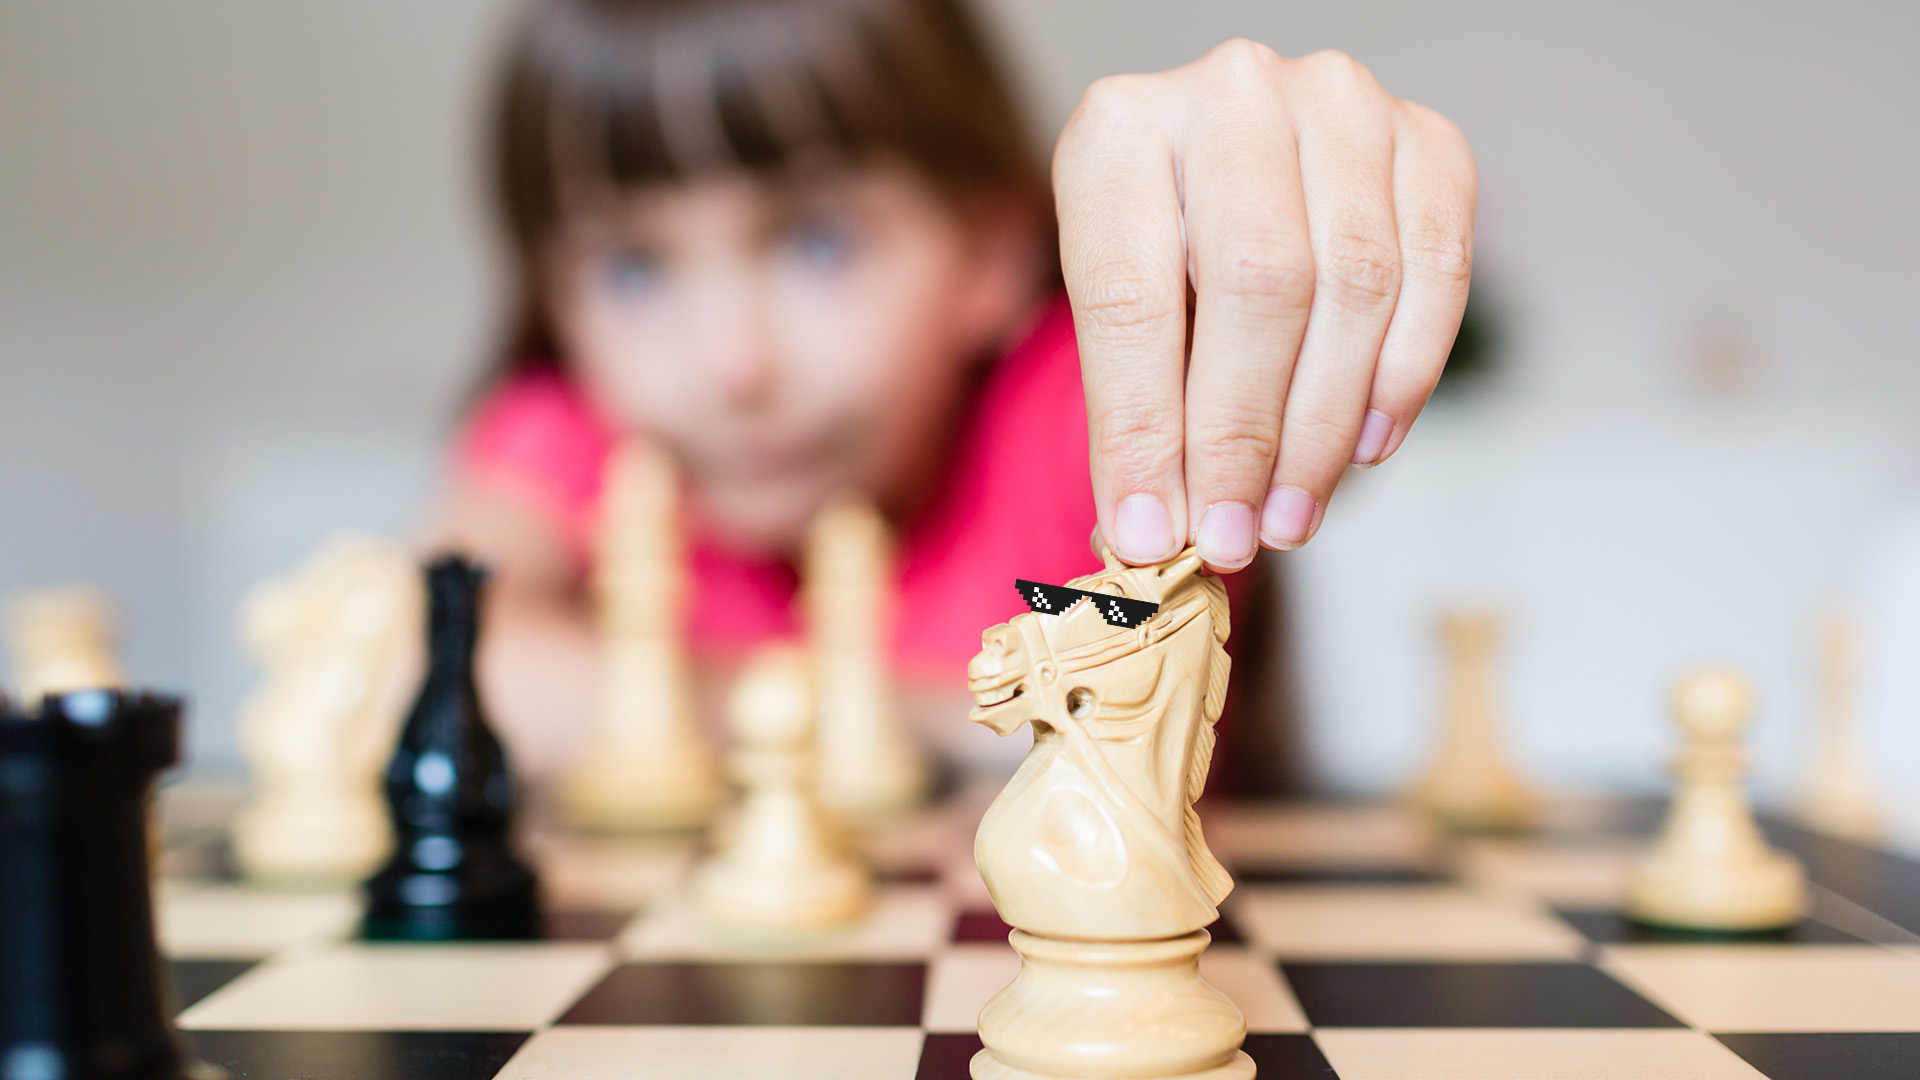 What qualities do talented chess players have?